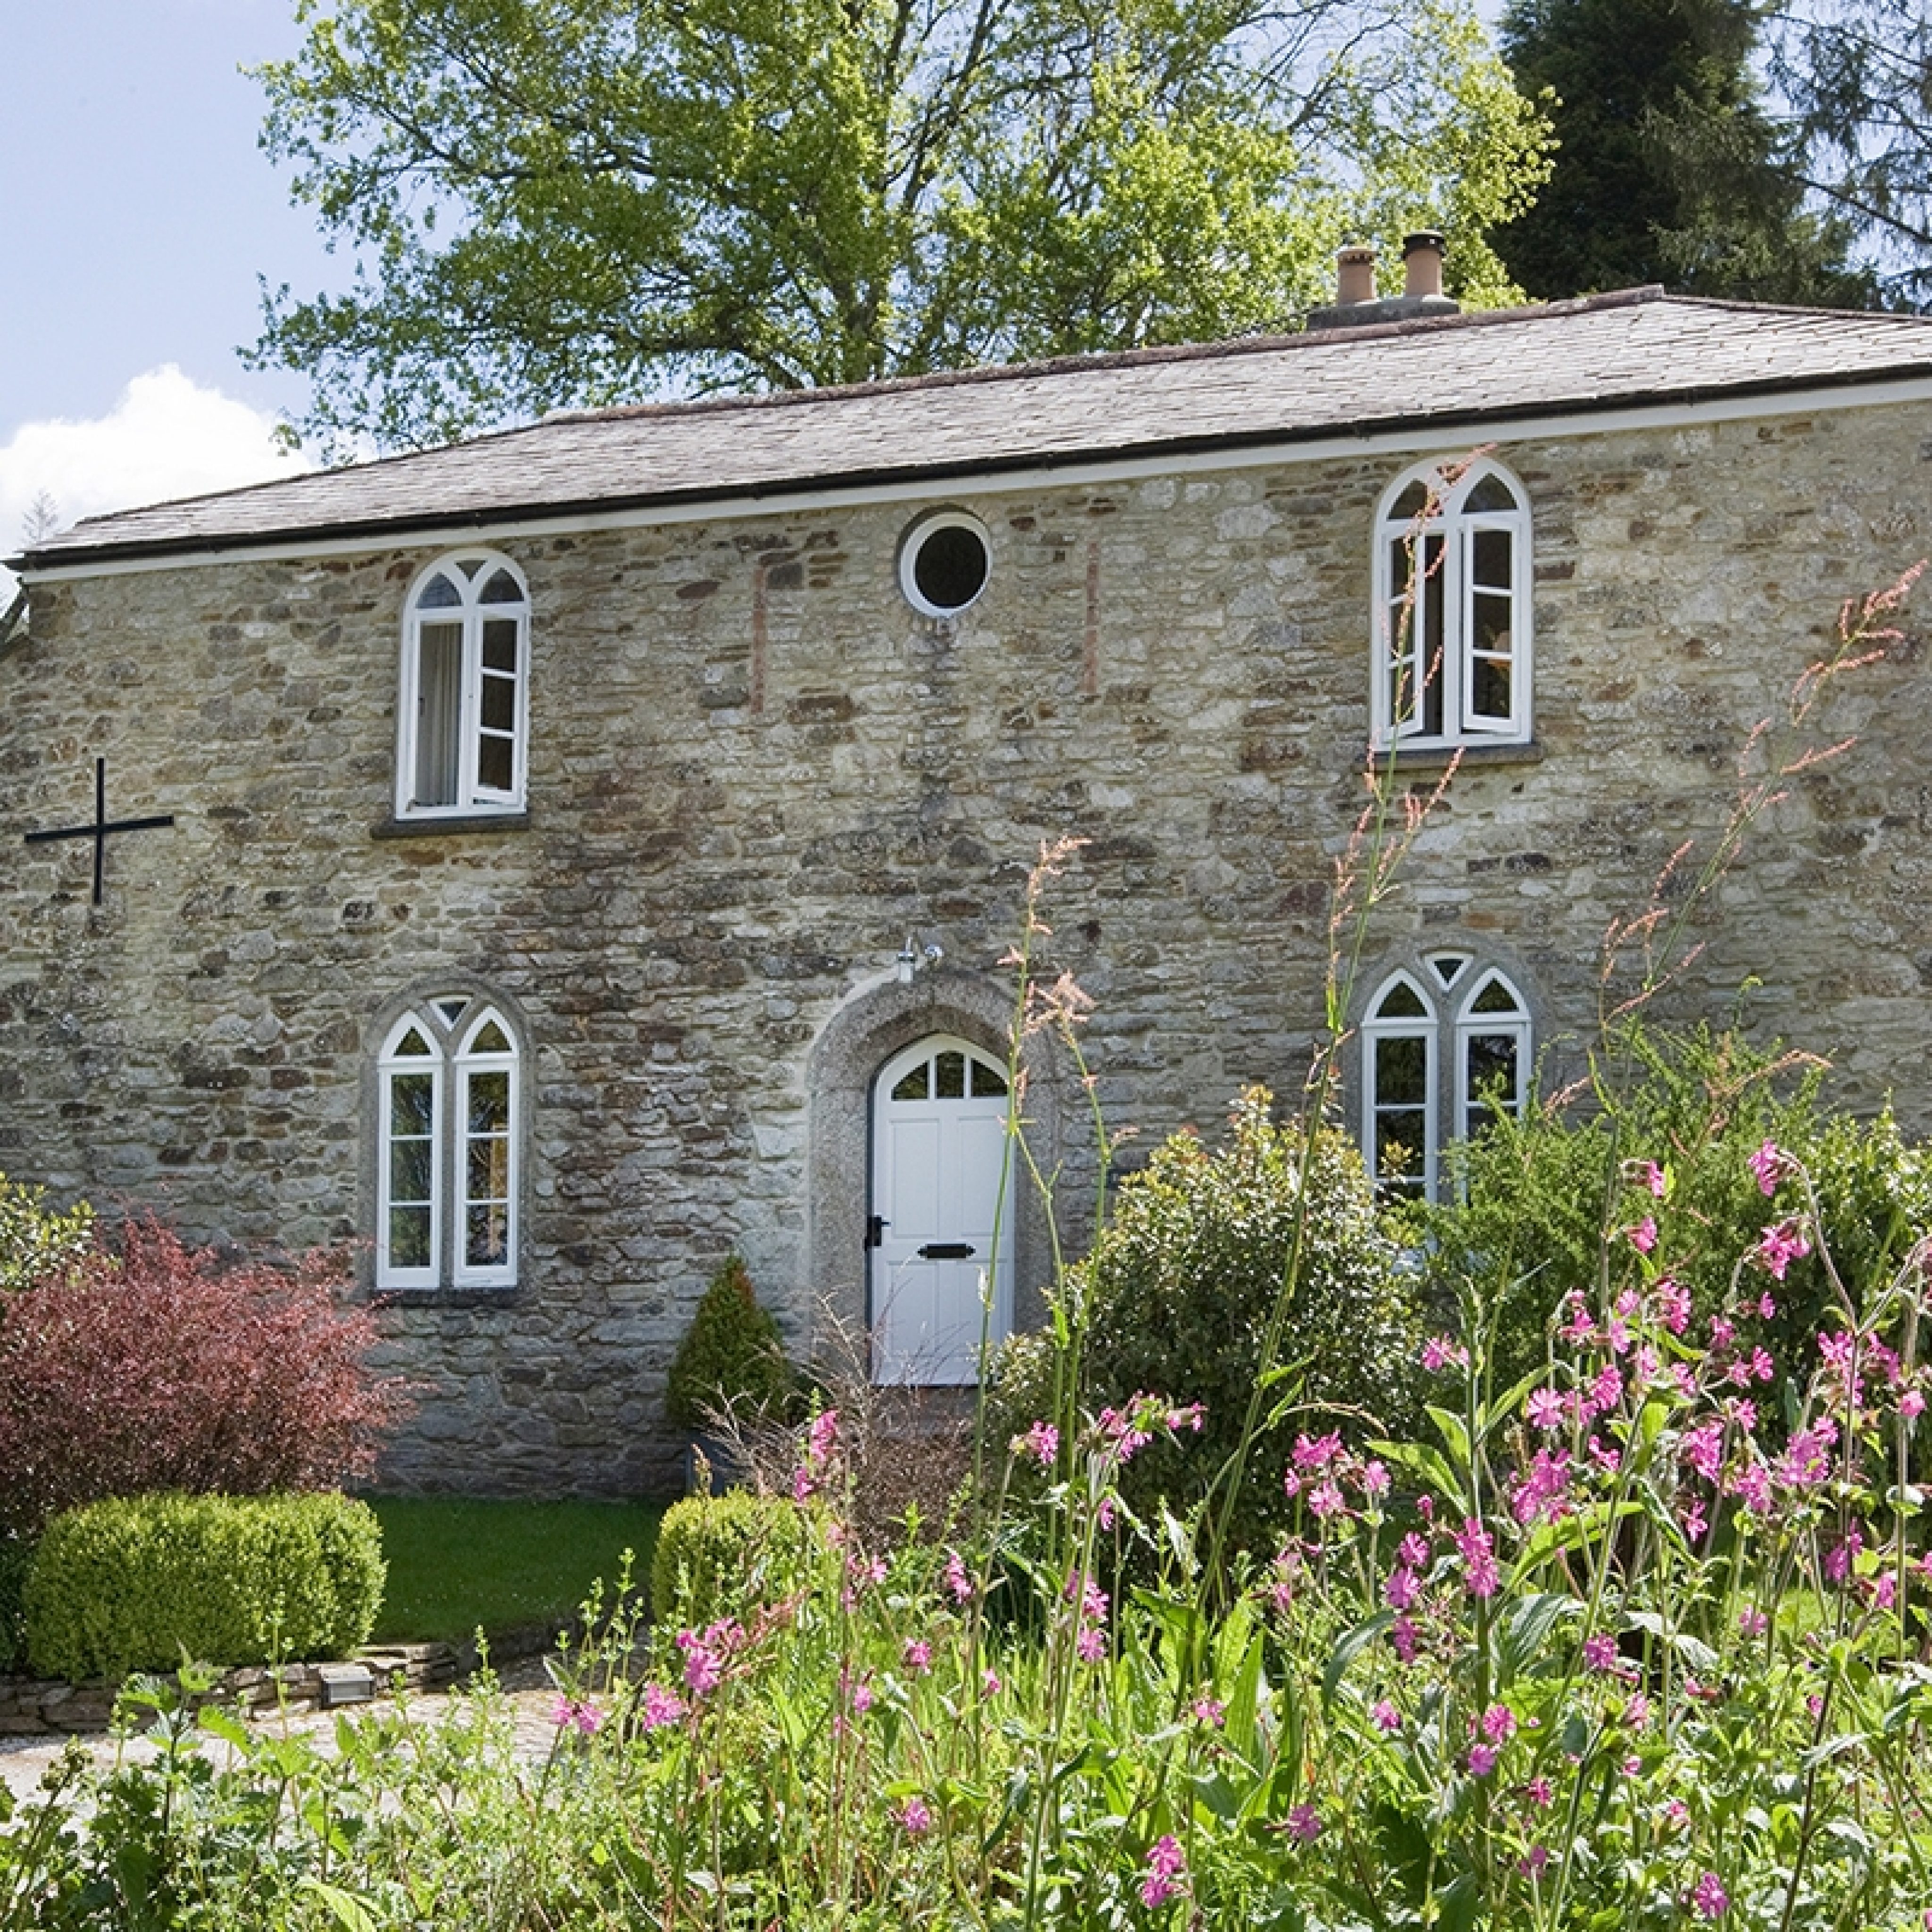 Holiday cottages for hire in cornwall